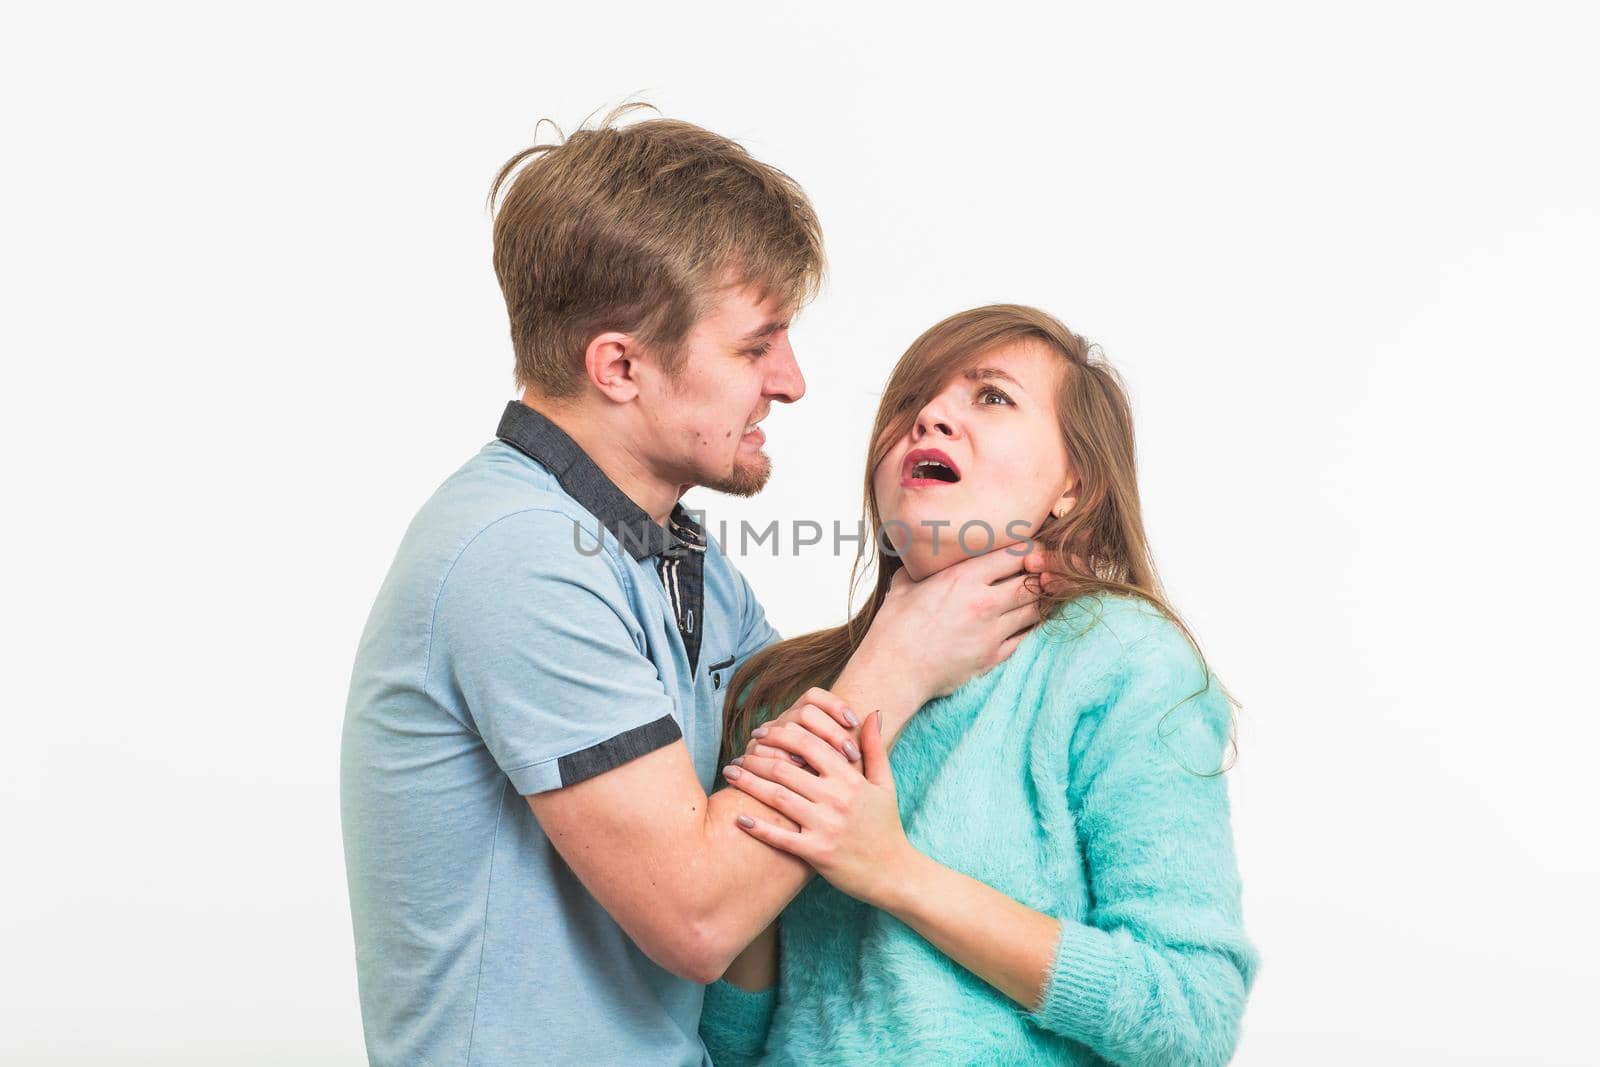 domestic violence, abuse and people concept - man beating woman on white background by Satura86